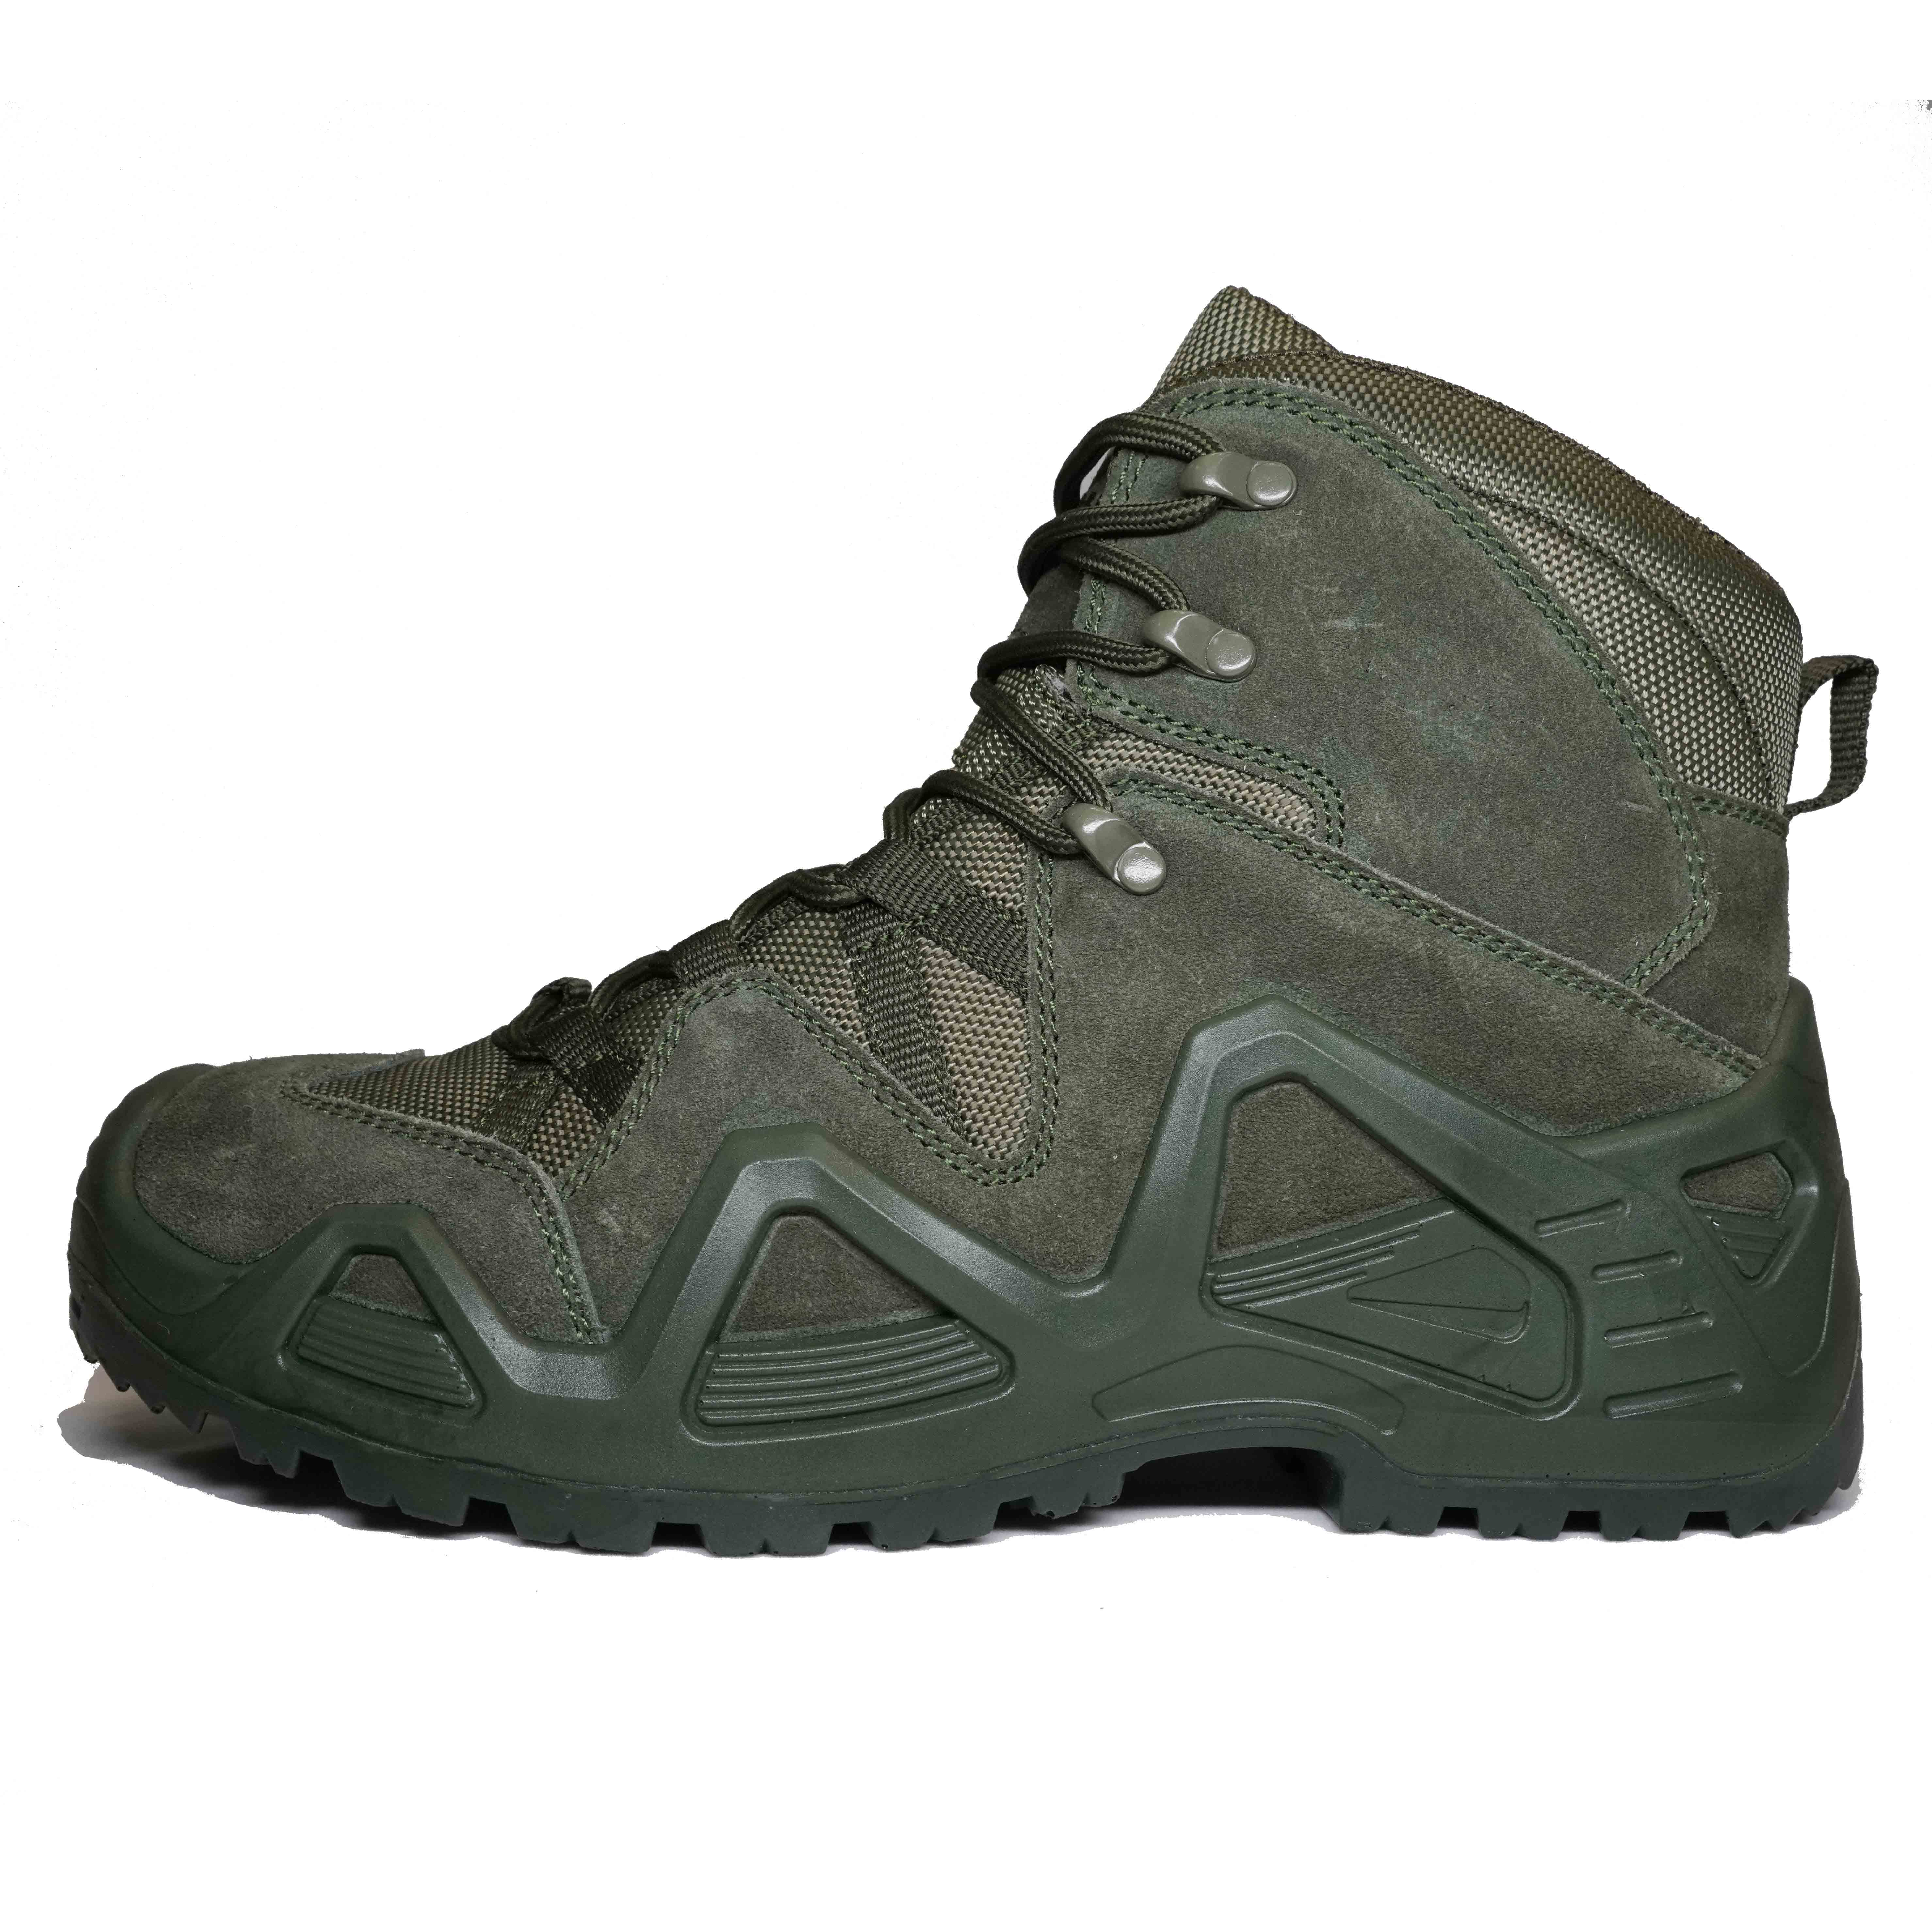 Military Boots Men's Lowa Zephyr Mid TF Boots Work Boots Outdoor Boots ...